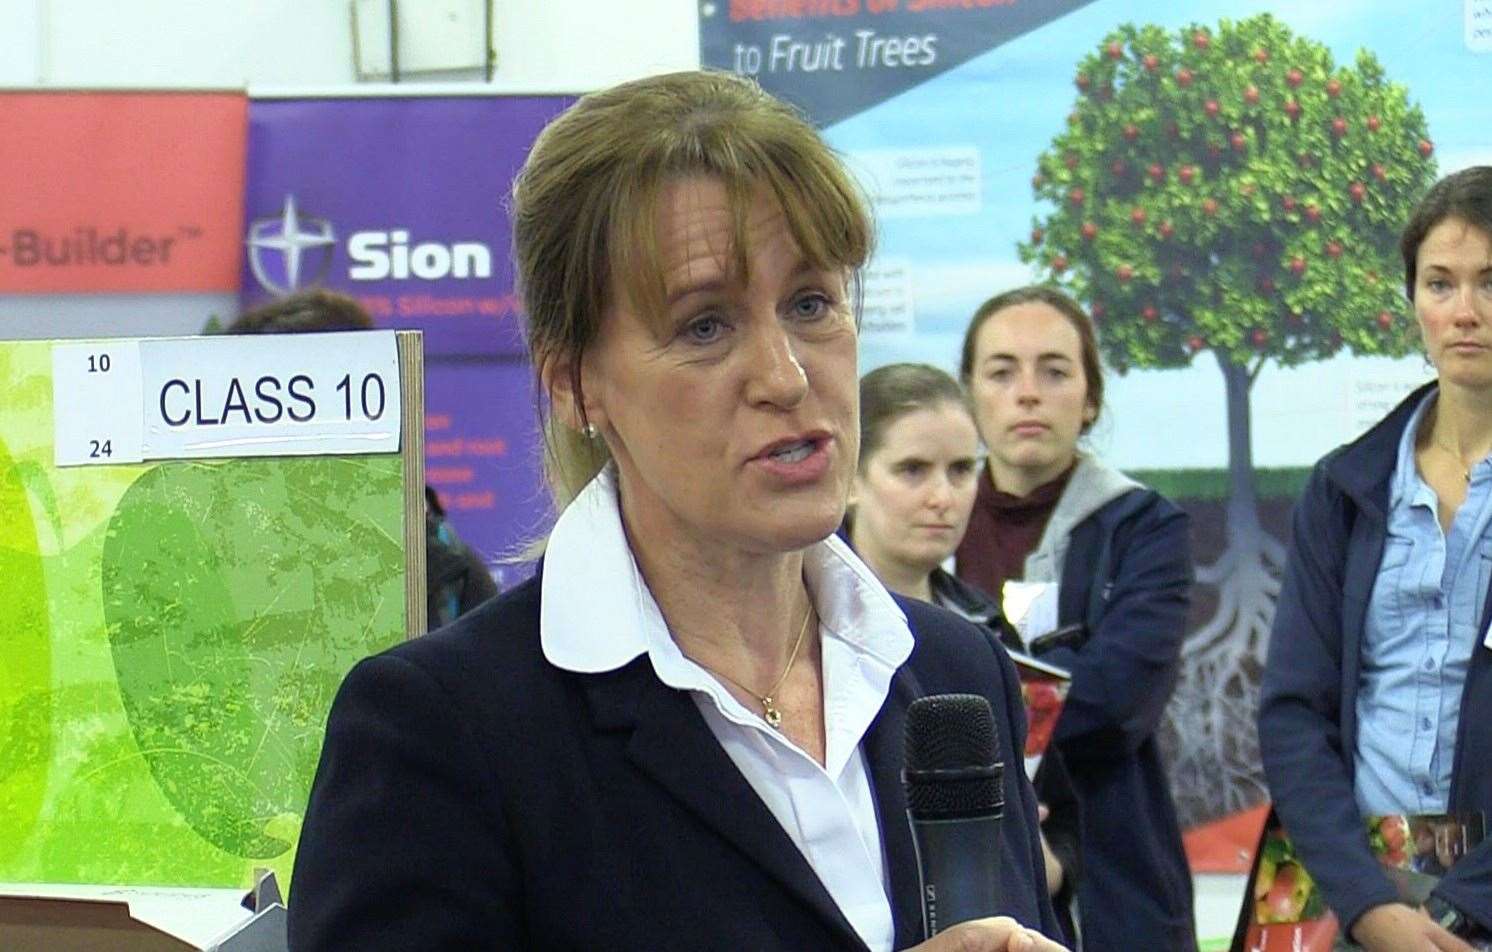 Minette Batters, president of the NFU, is concerned about the loss of seasonal workers post-Brexit